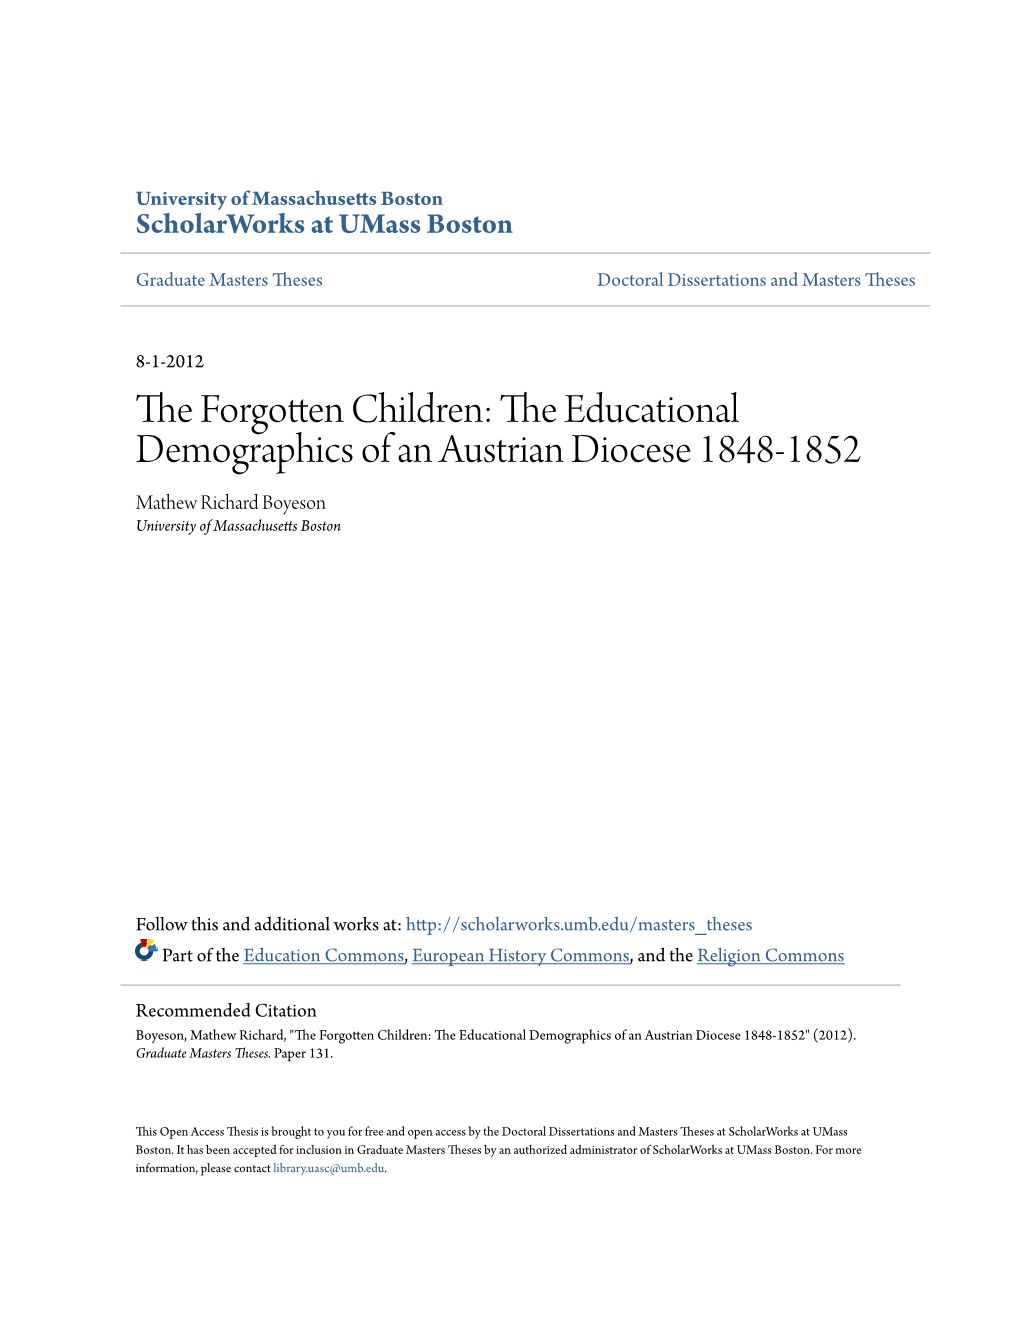 The Educational Demographics of an Austrian Diocese 1848-1852